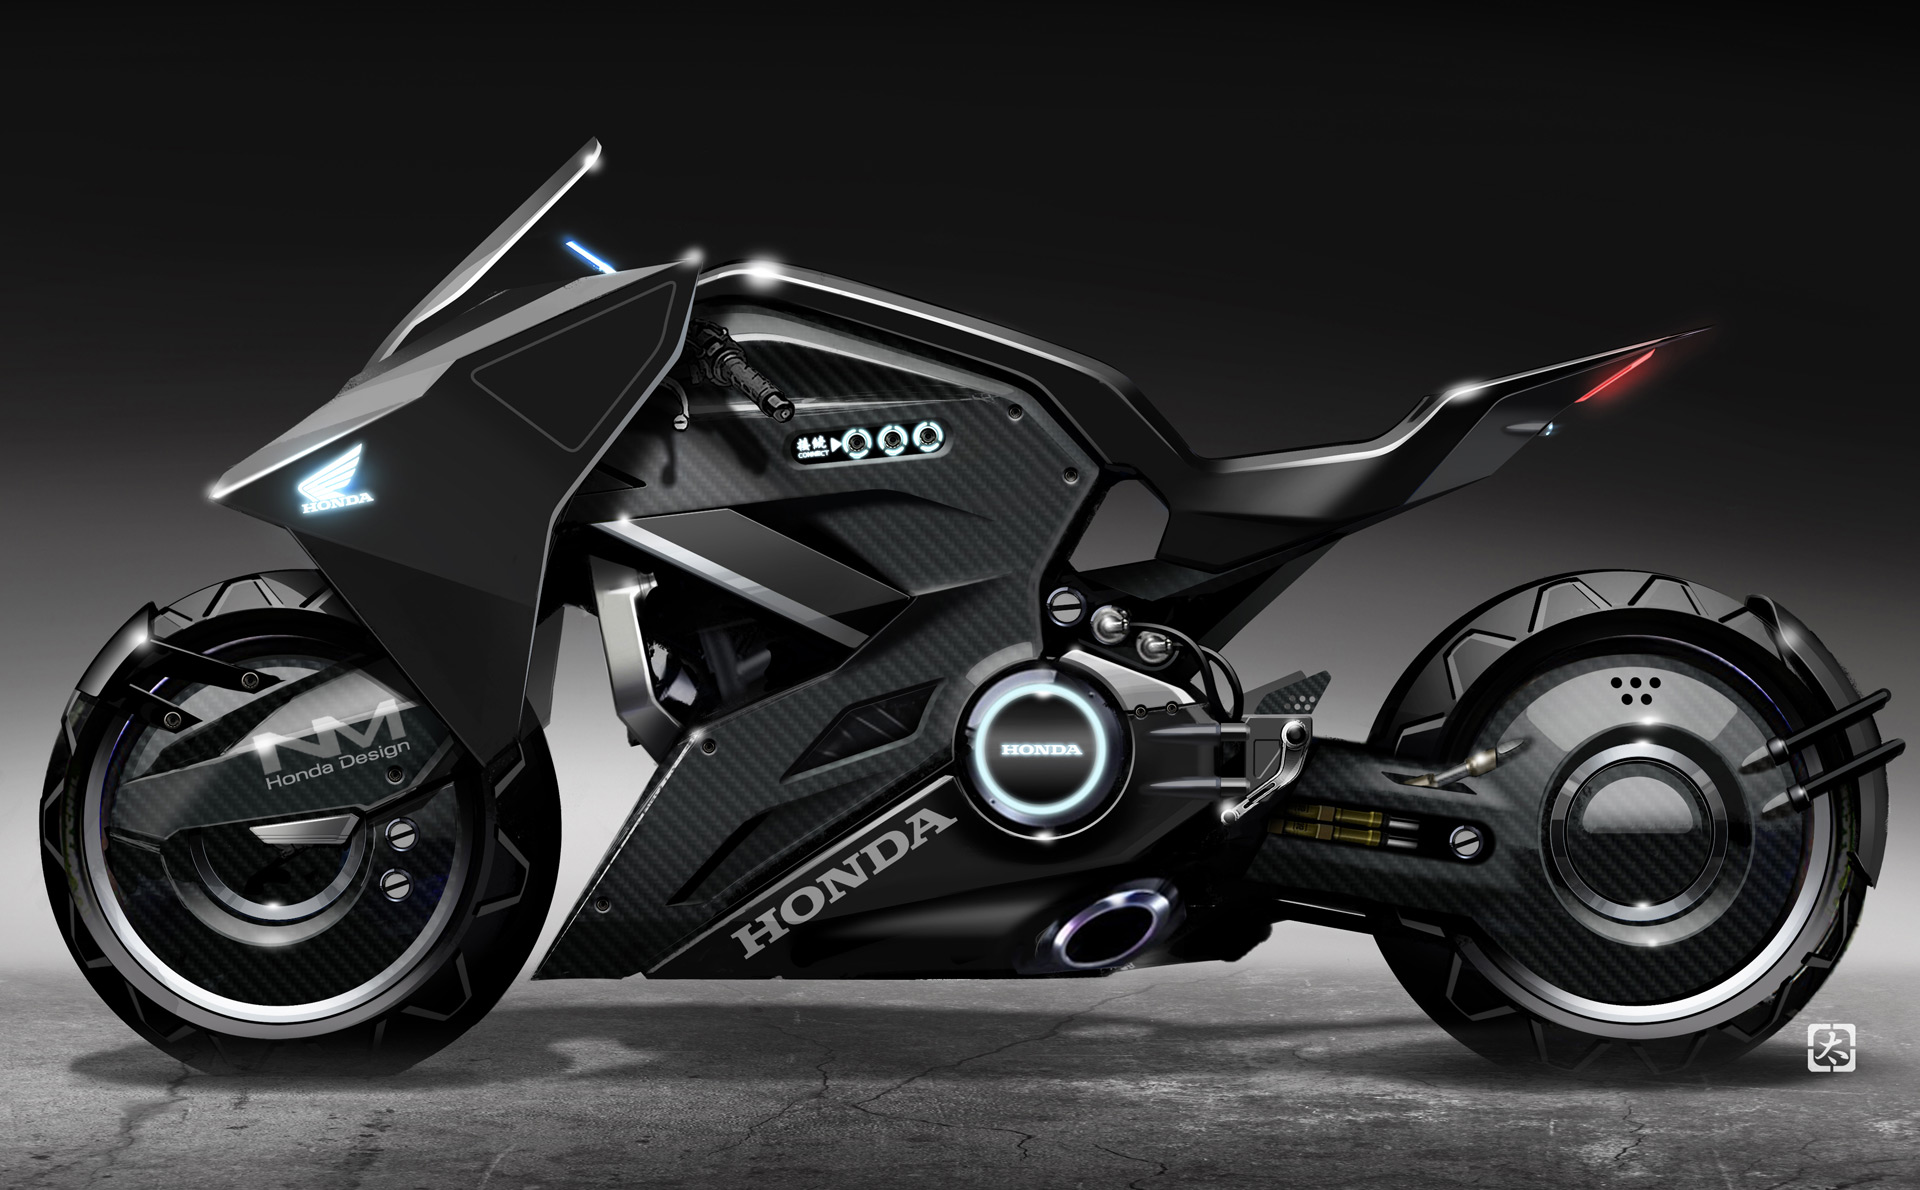 Futuristic Honda motorcycle to star in 'Ghost in the Shell'